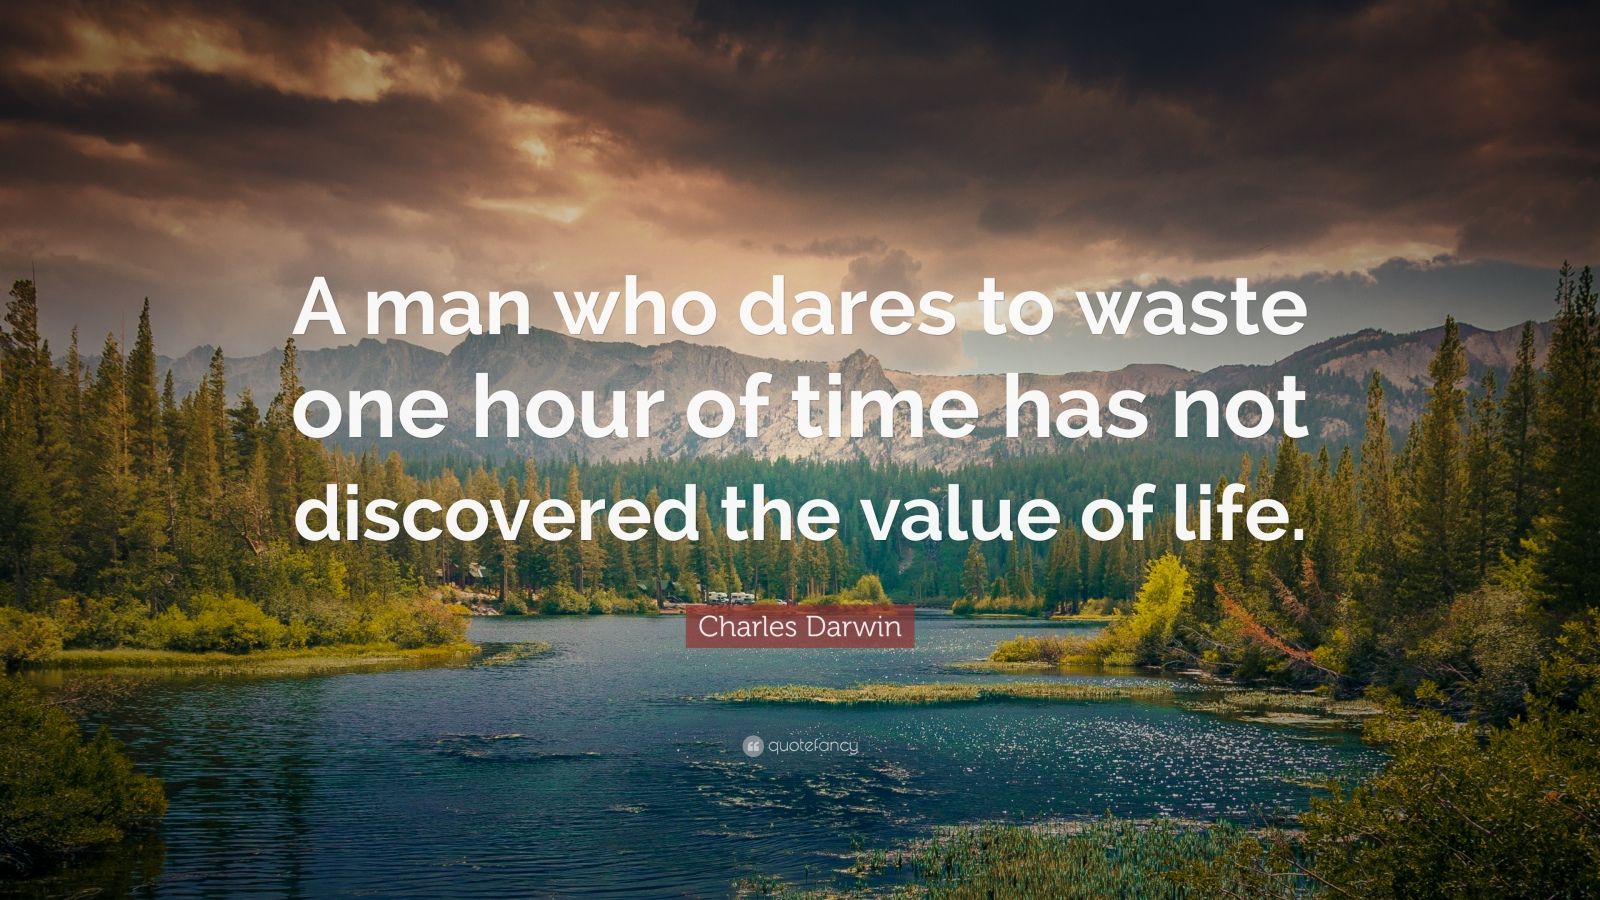 Charles Darwin Quote: “A man who dares to waste one hour of time has